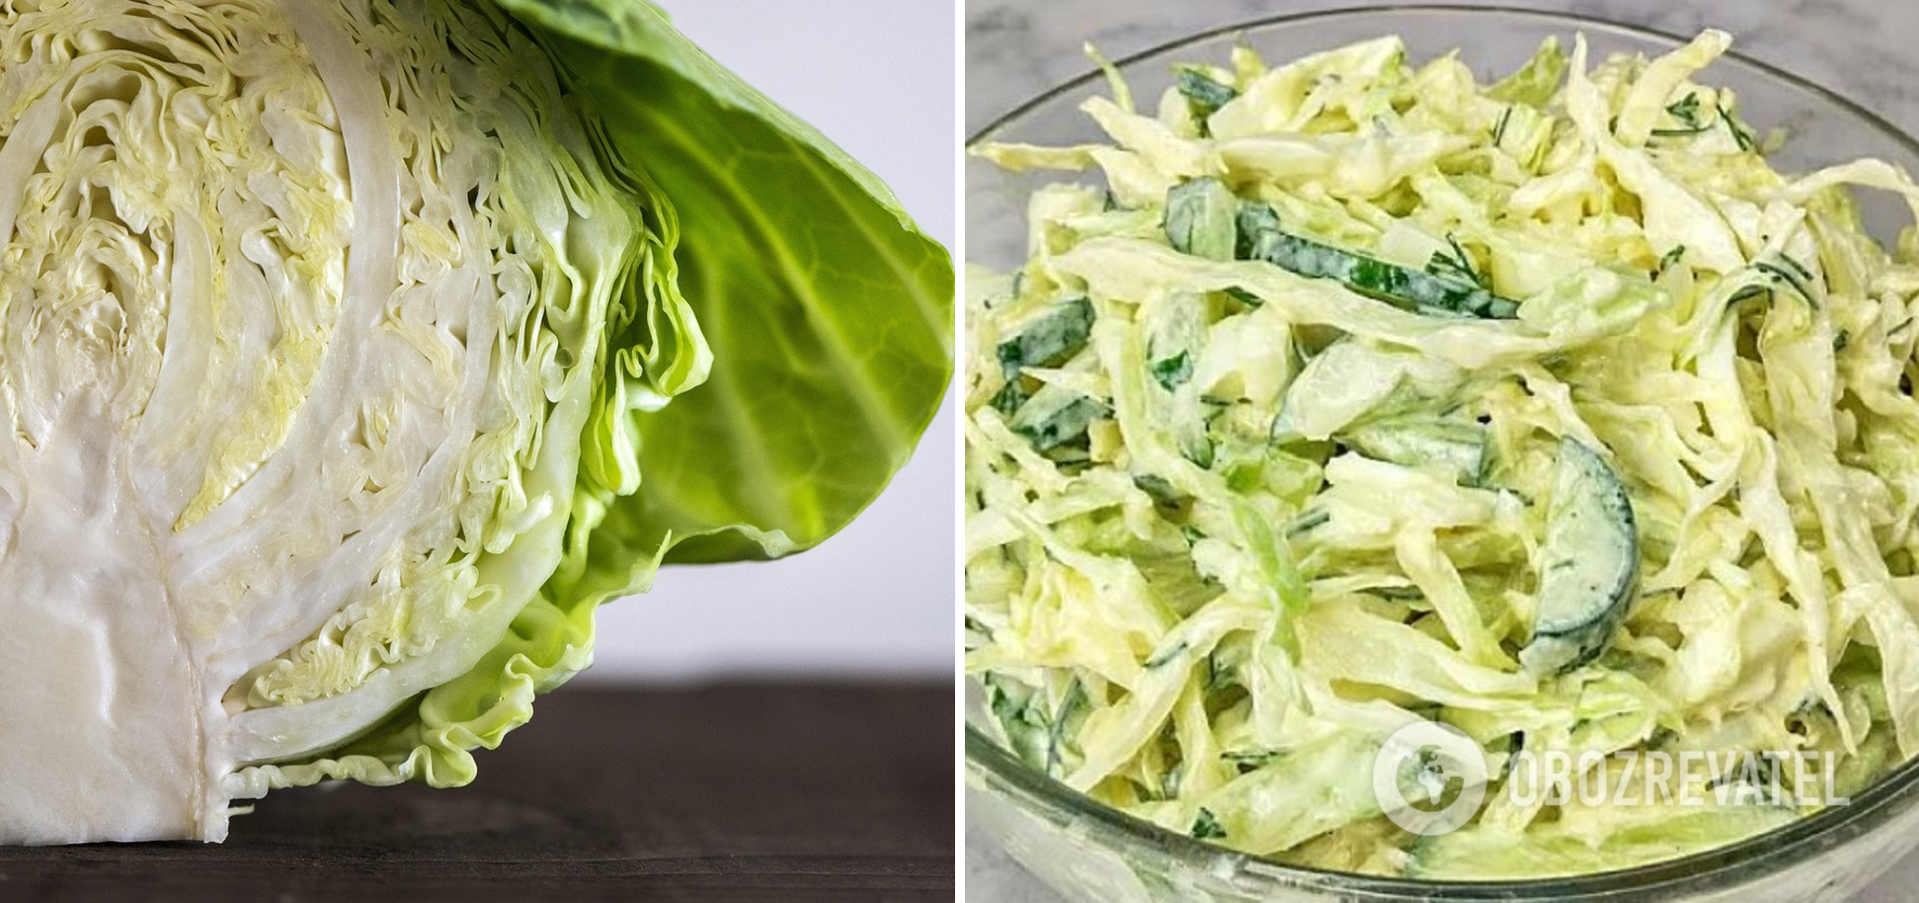 Salad with young cabbage